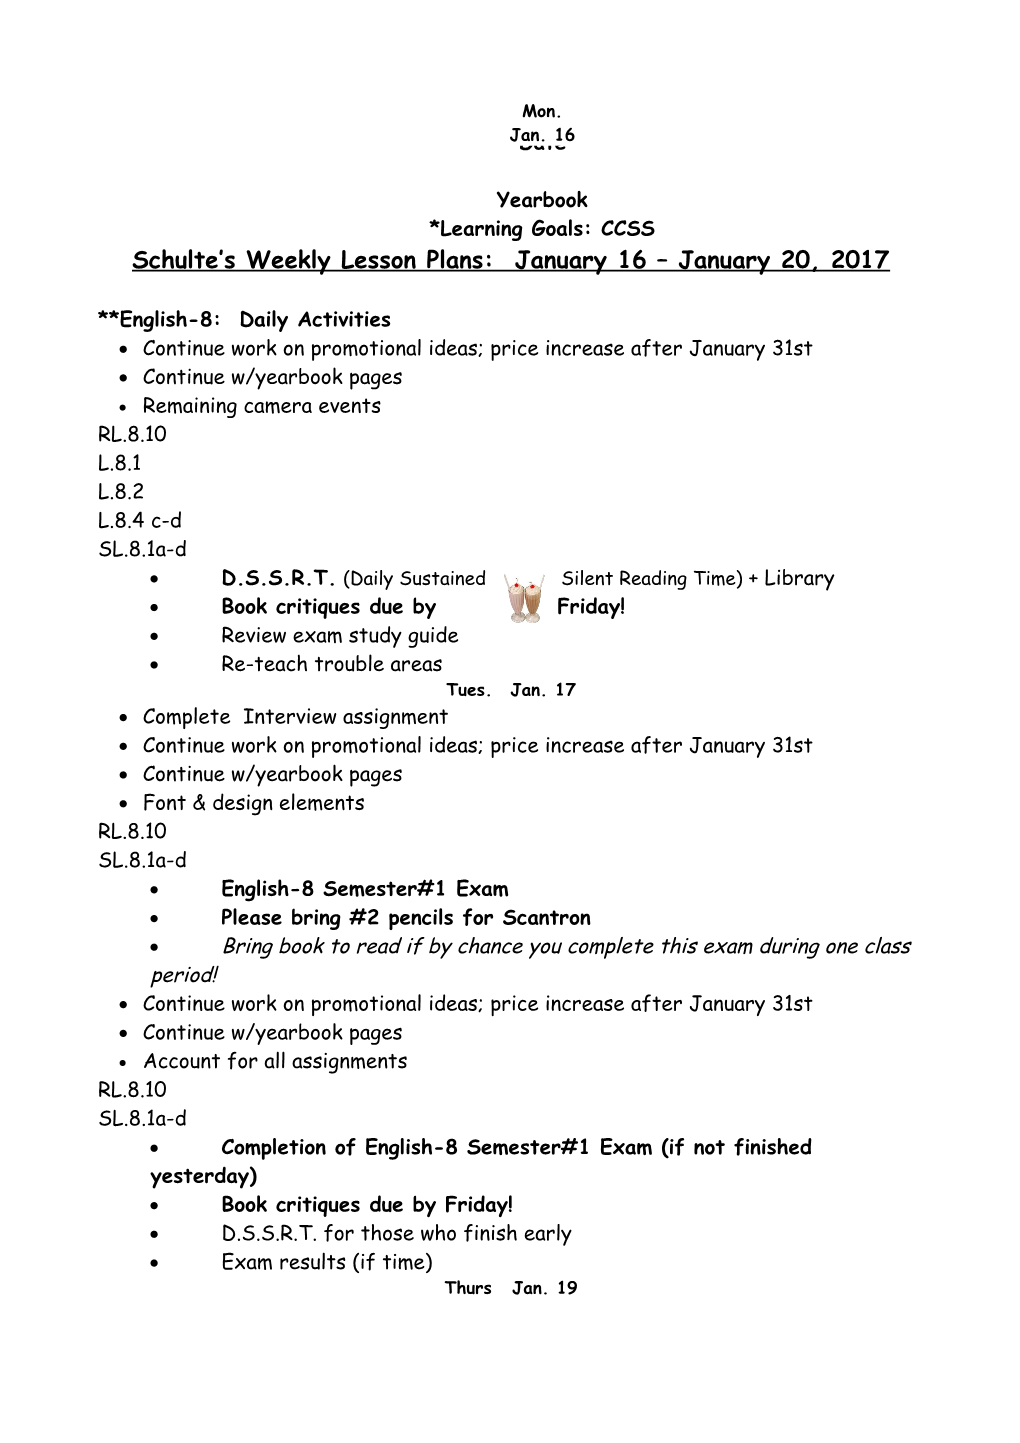 Schulte S Weekly Lesson Plans: January 16 January 20, 2017